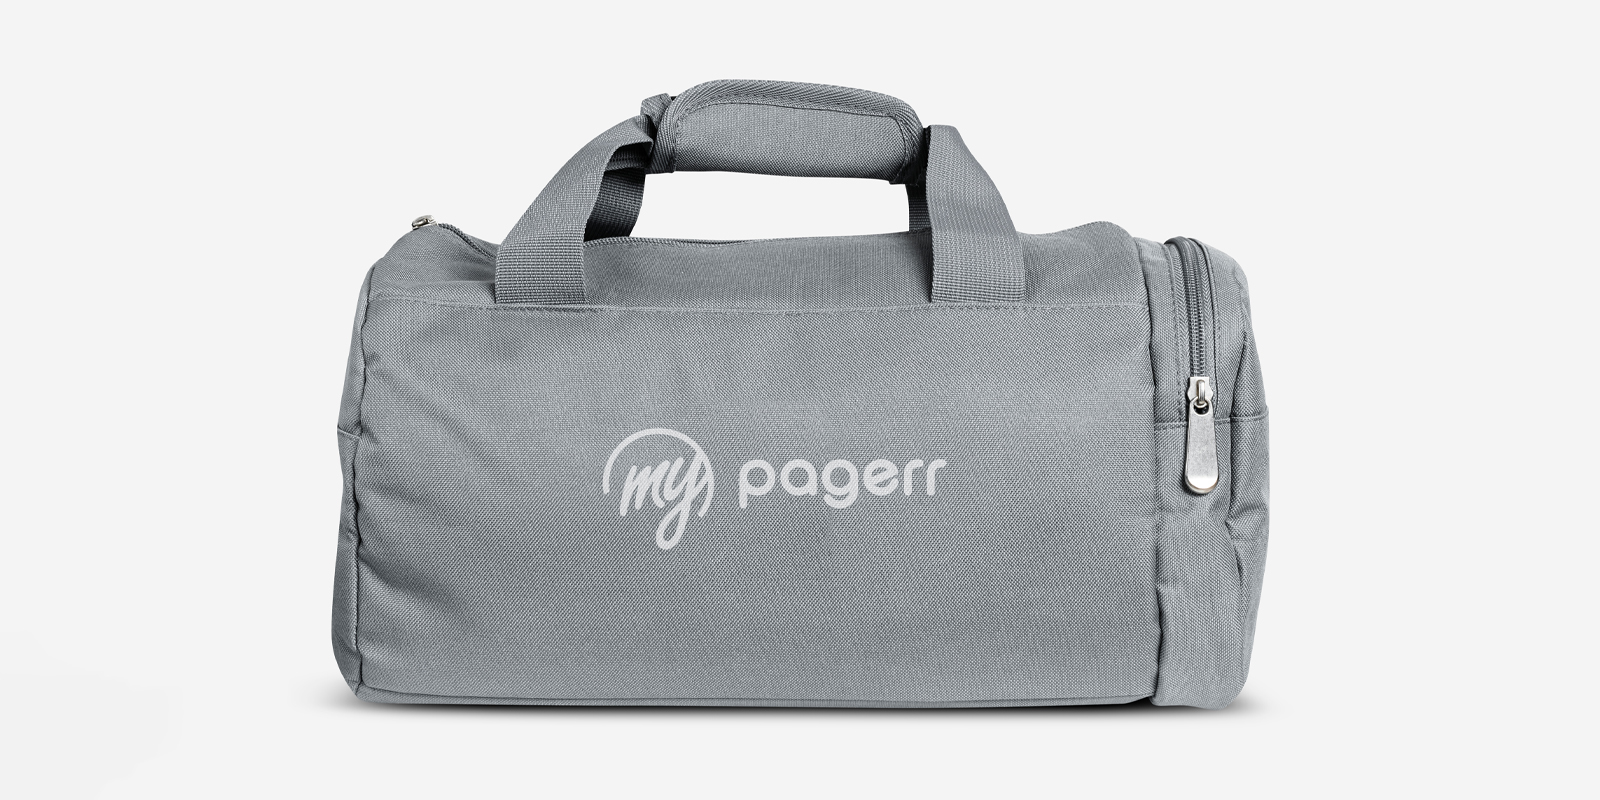 Duffel & gym bags in Warsaw - Print with Pagerr